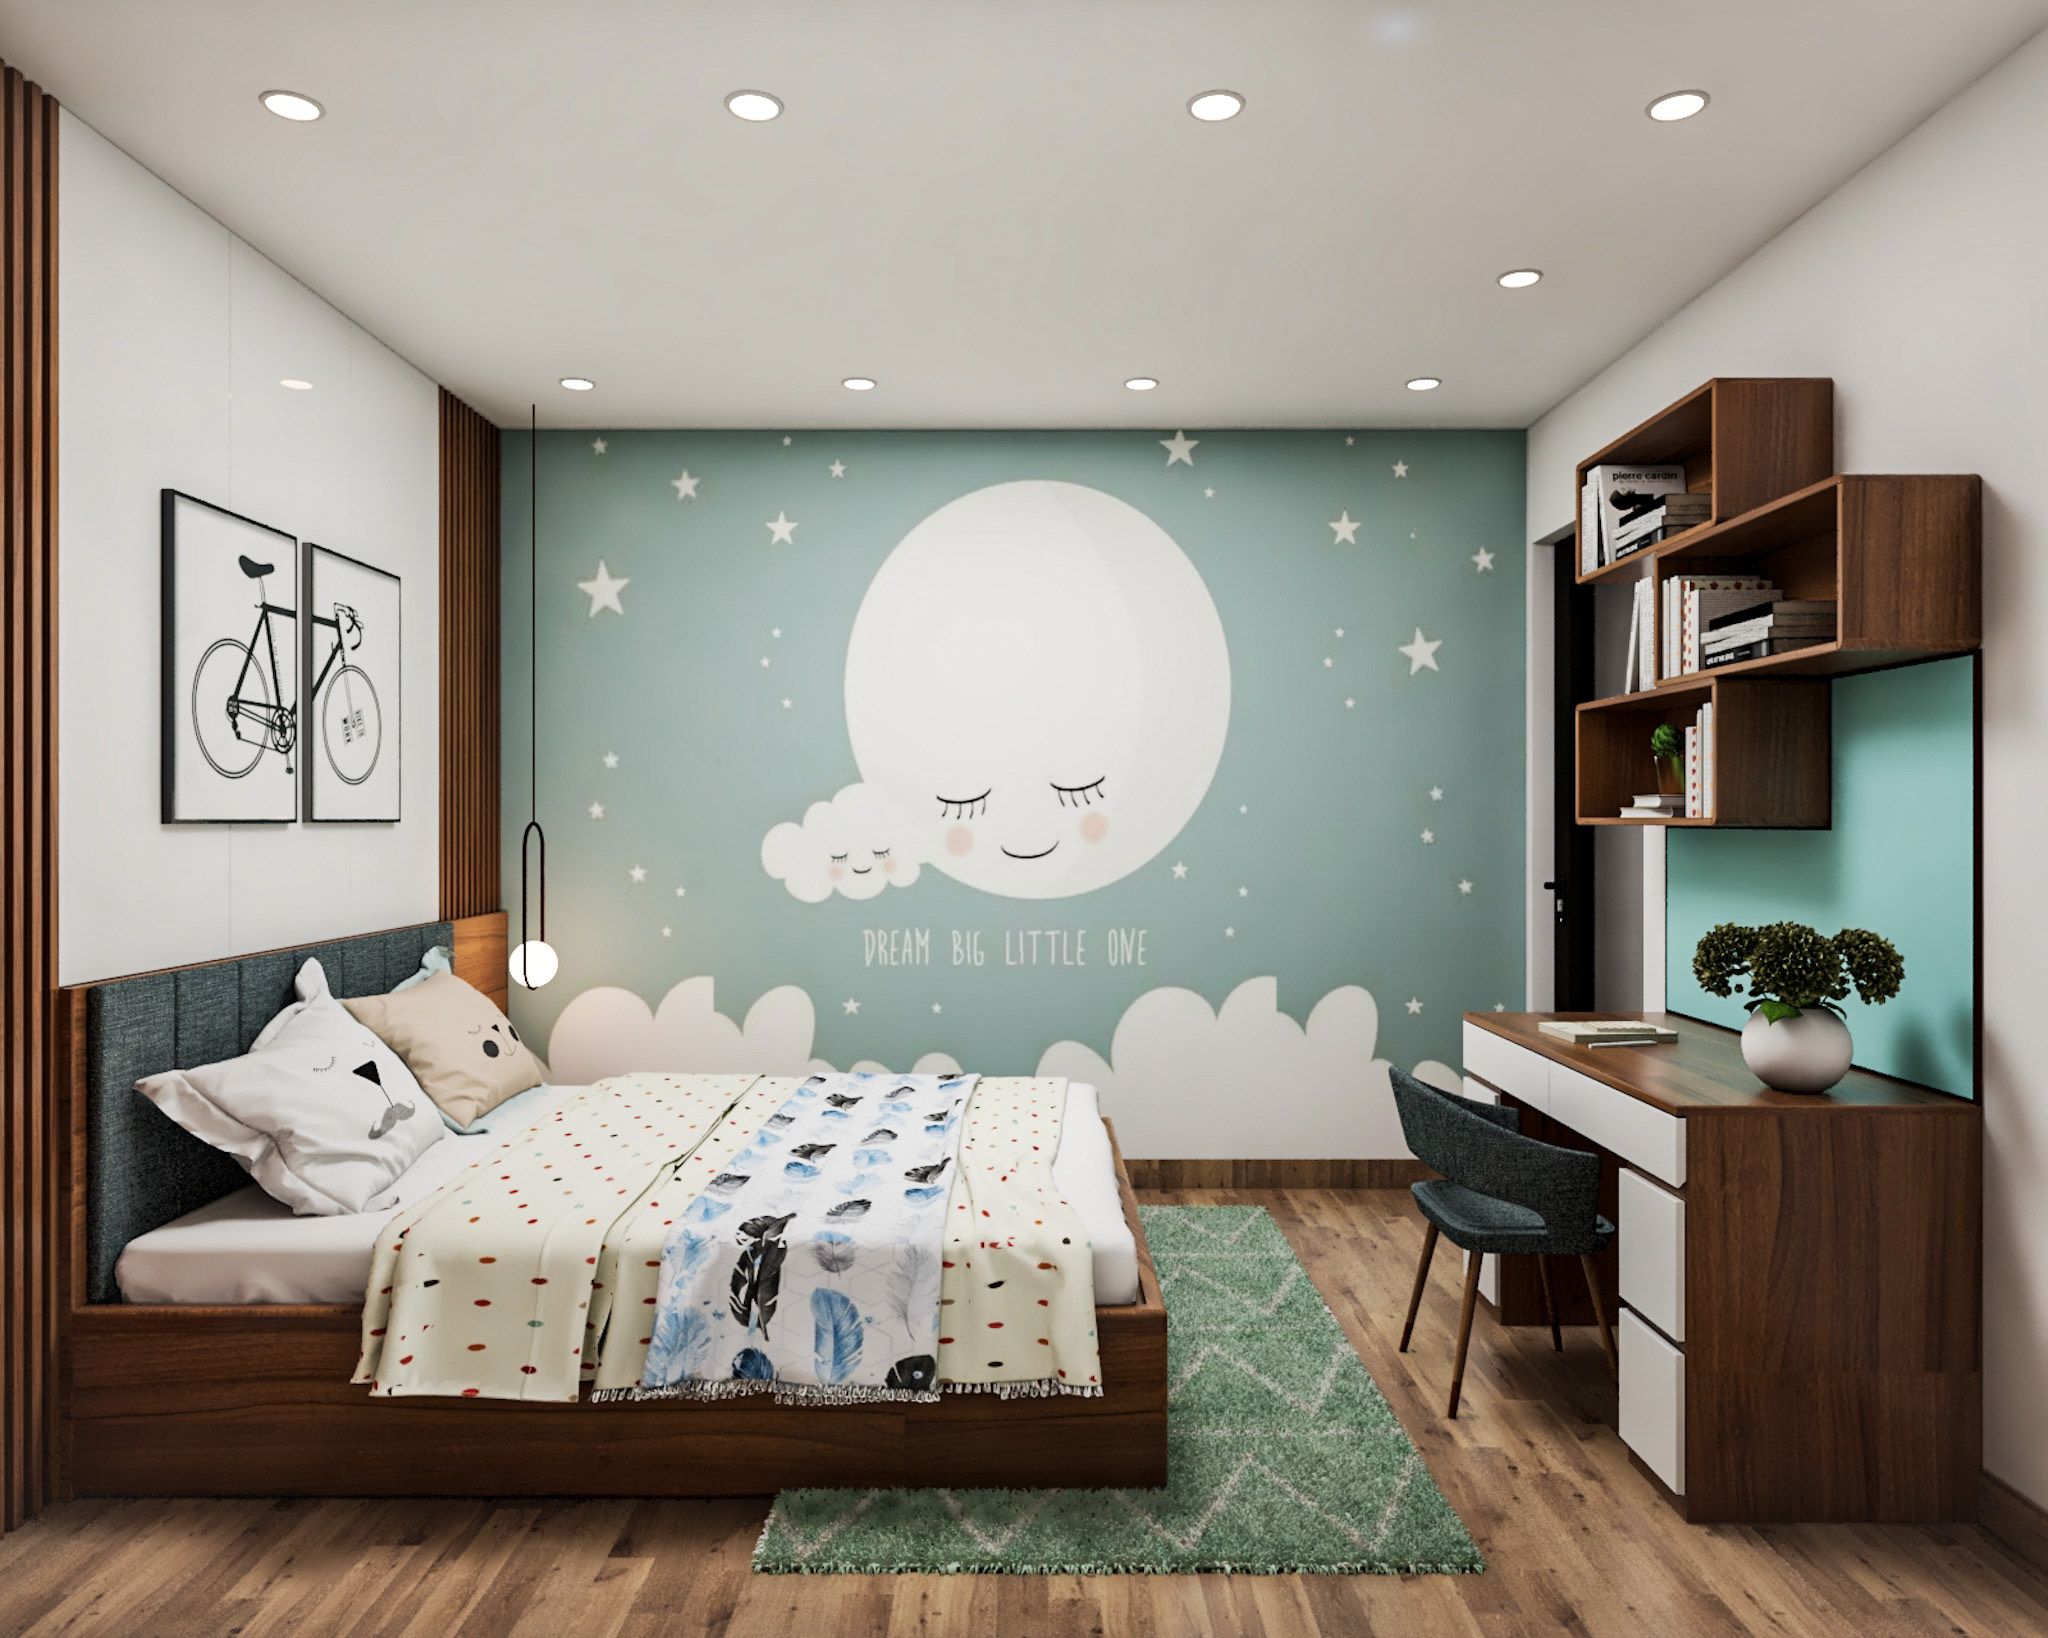 Modern Kids Room Design With A Wooden Queen Size Bed And Grey Headboard